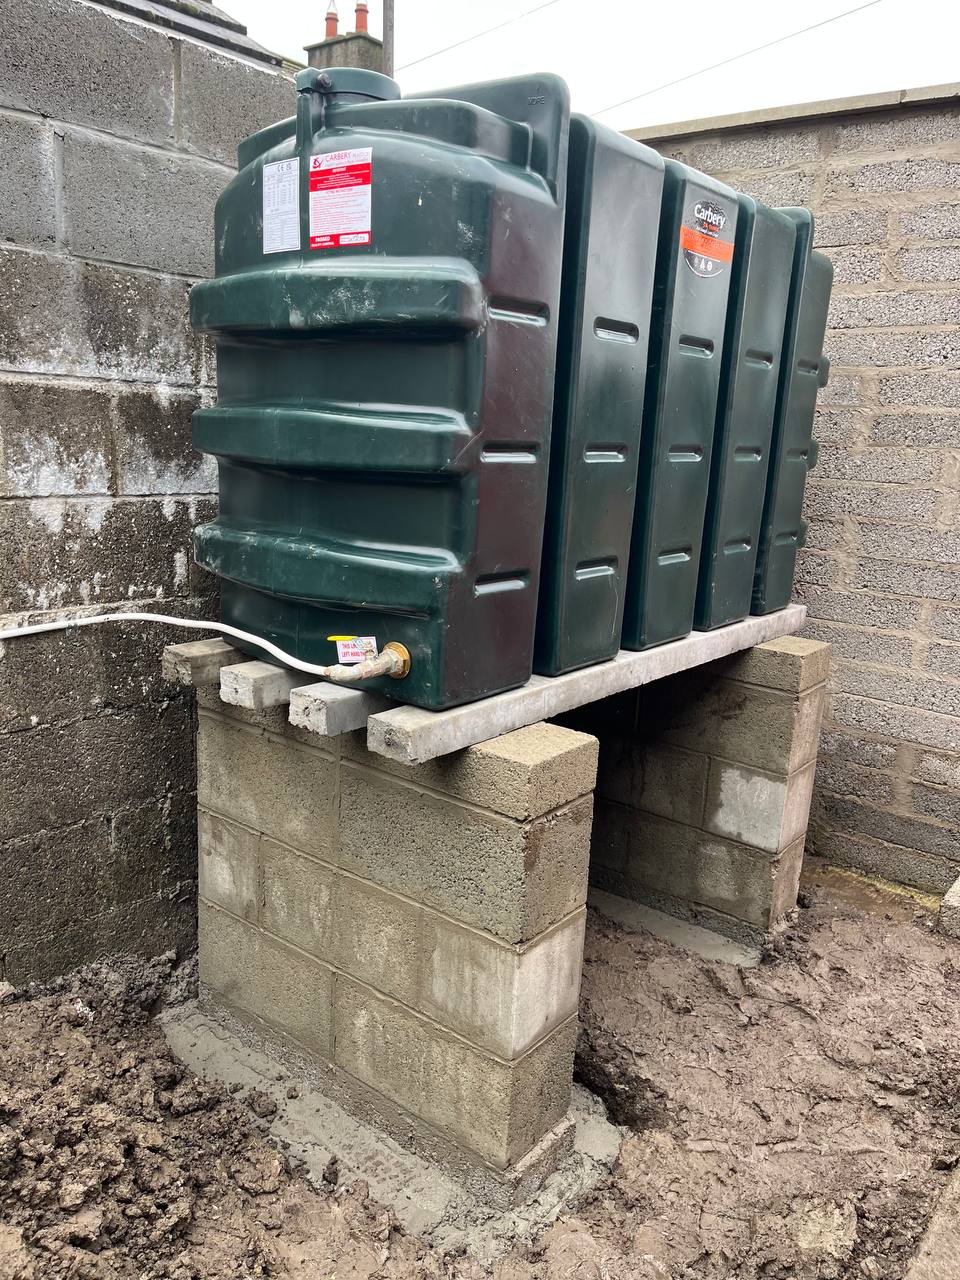 Oil tank relocation, replacement service in Arklow, Wicklow